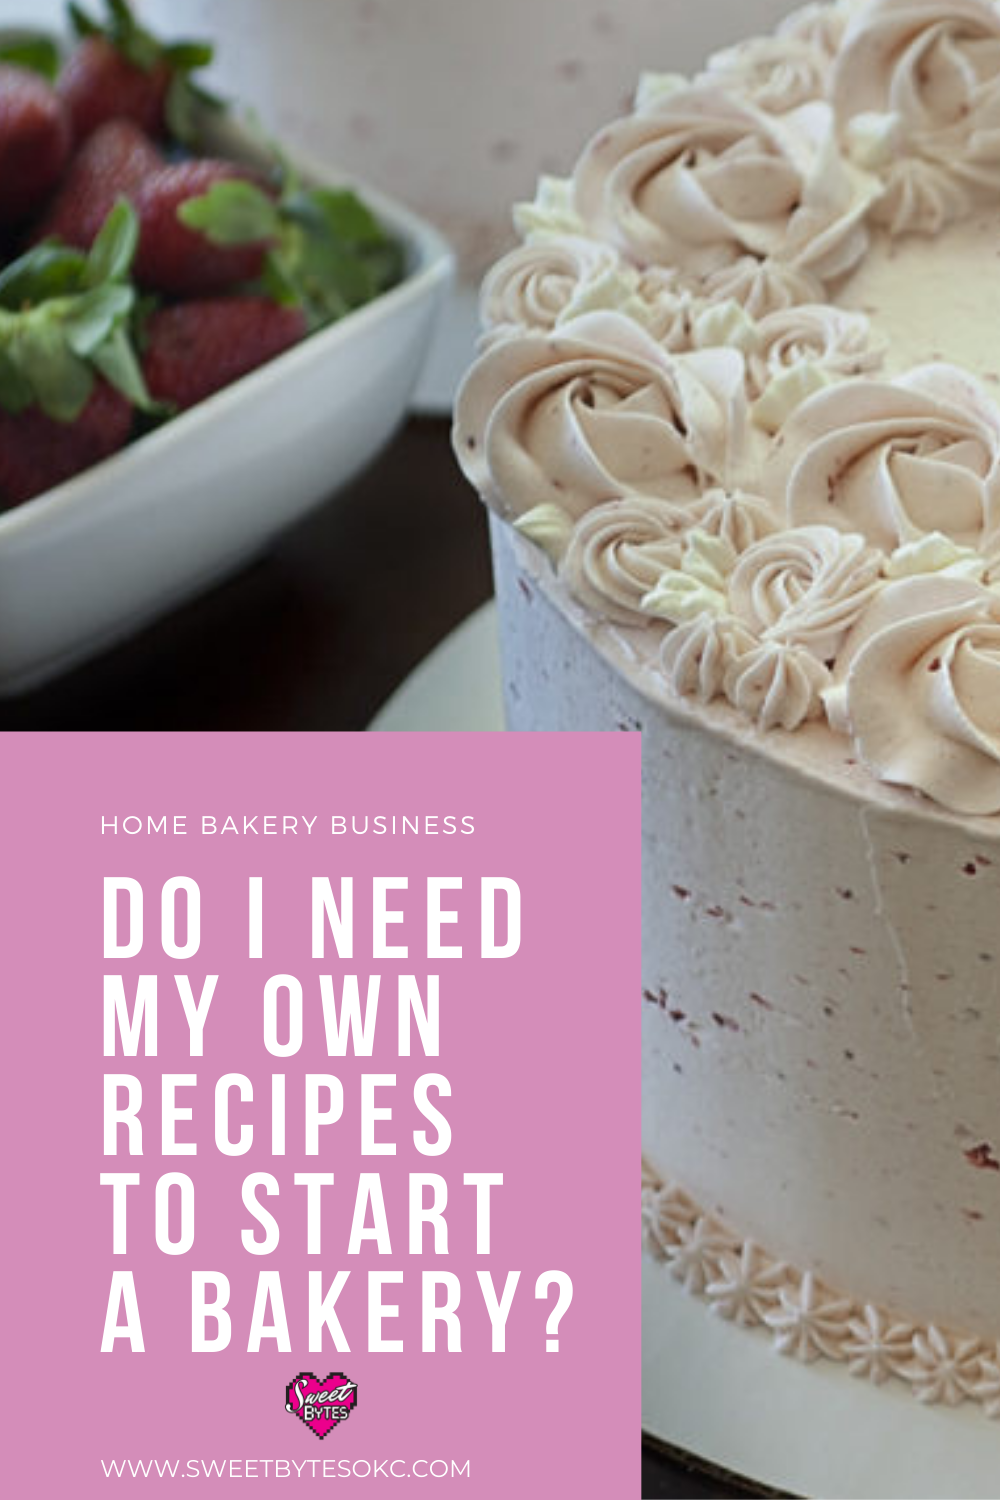 Strawberry cake with piped flowers on top and a white bowl full of fresh strawberries, graphic overlay asking do I need my own recipes to start a bakery